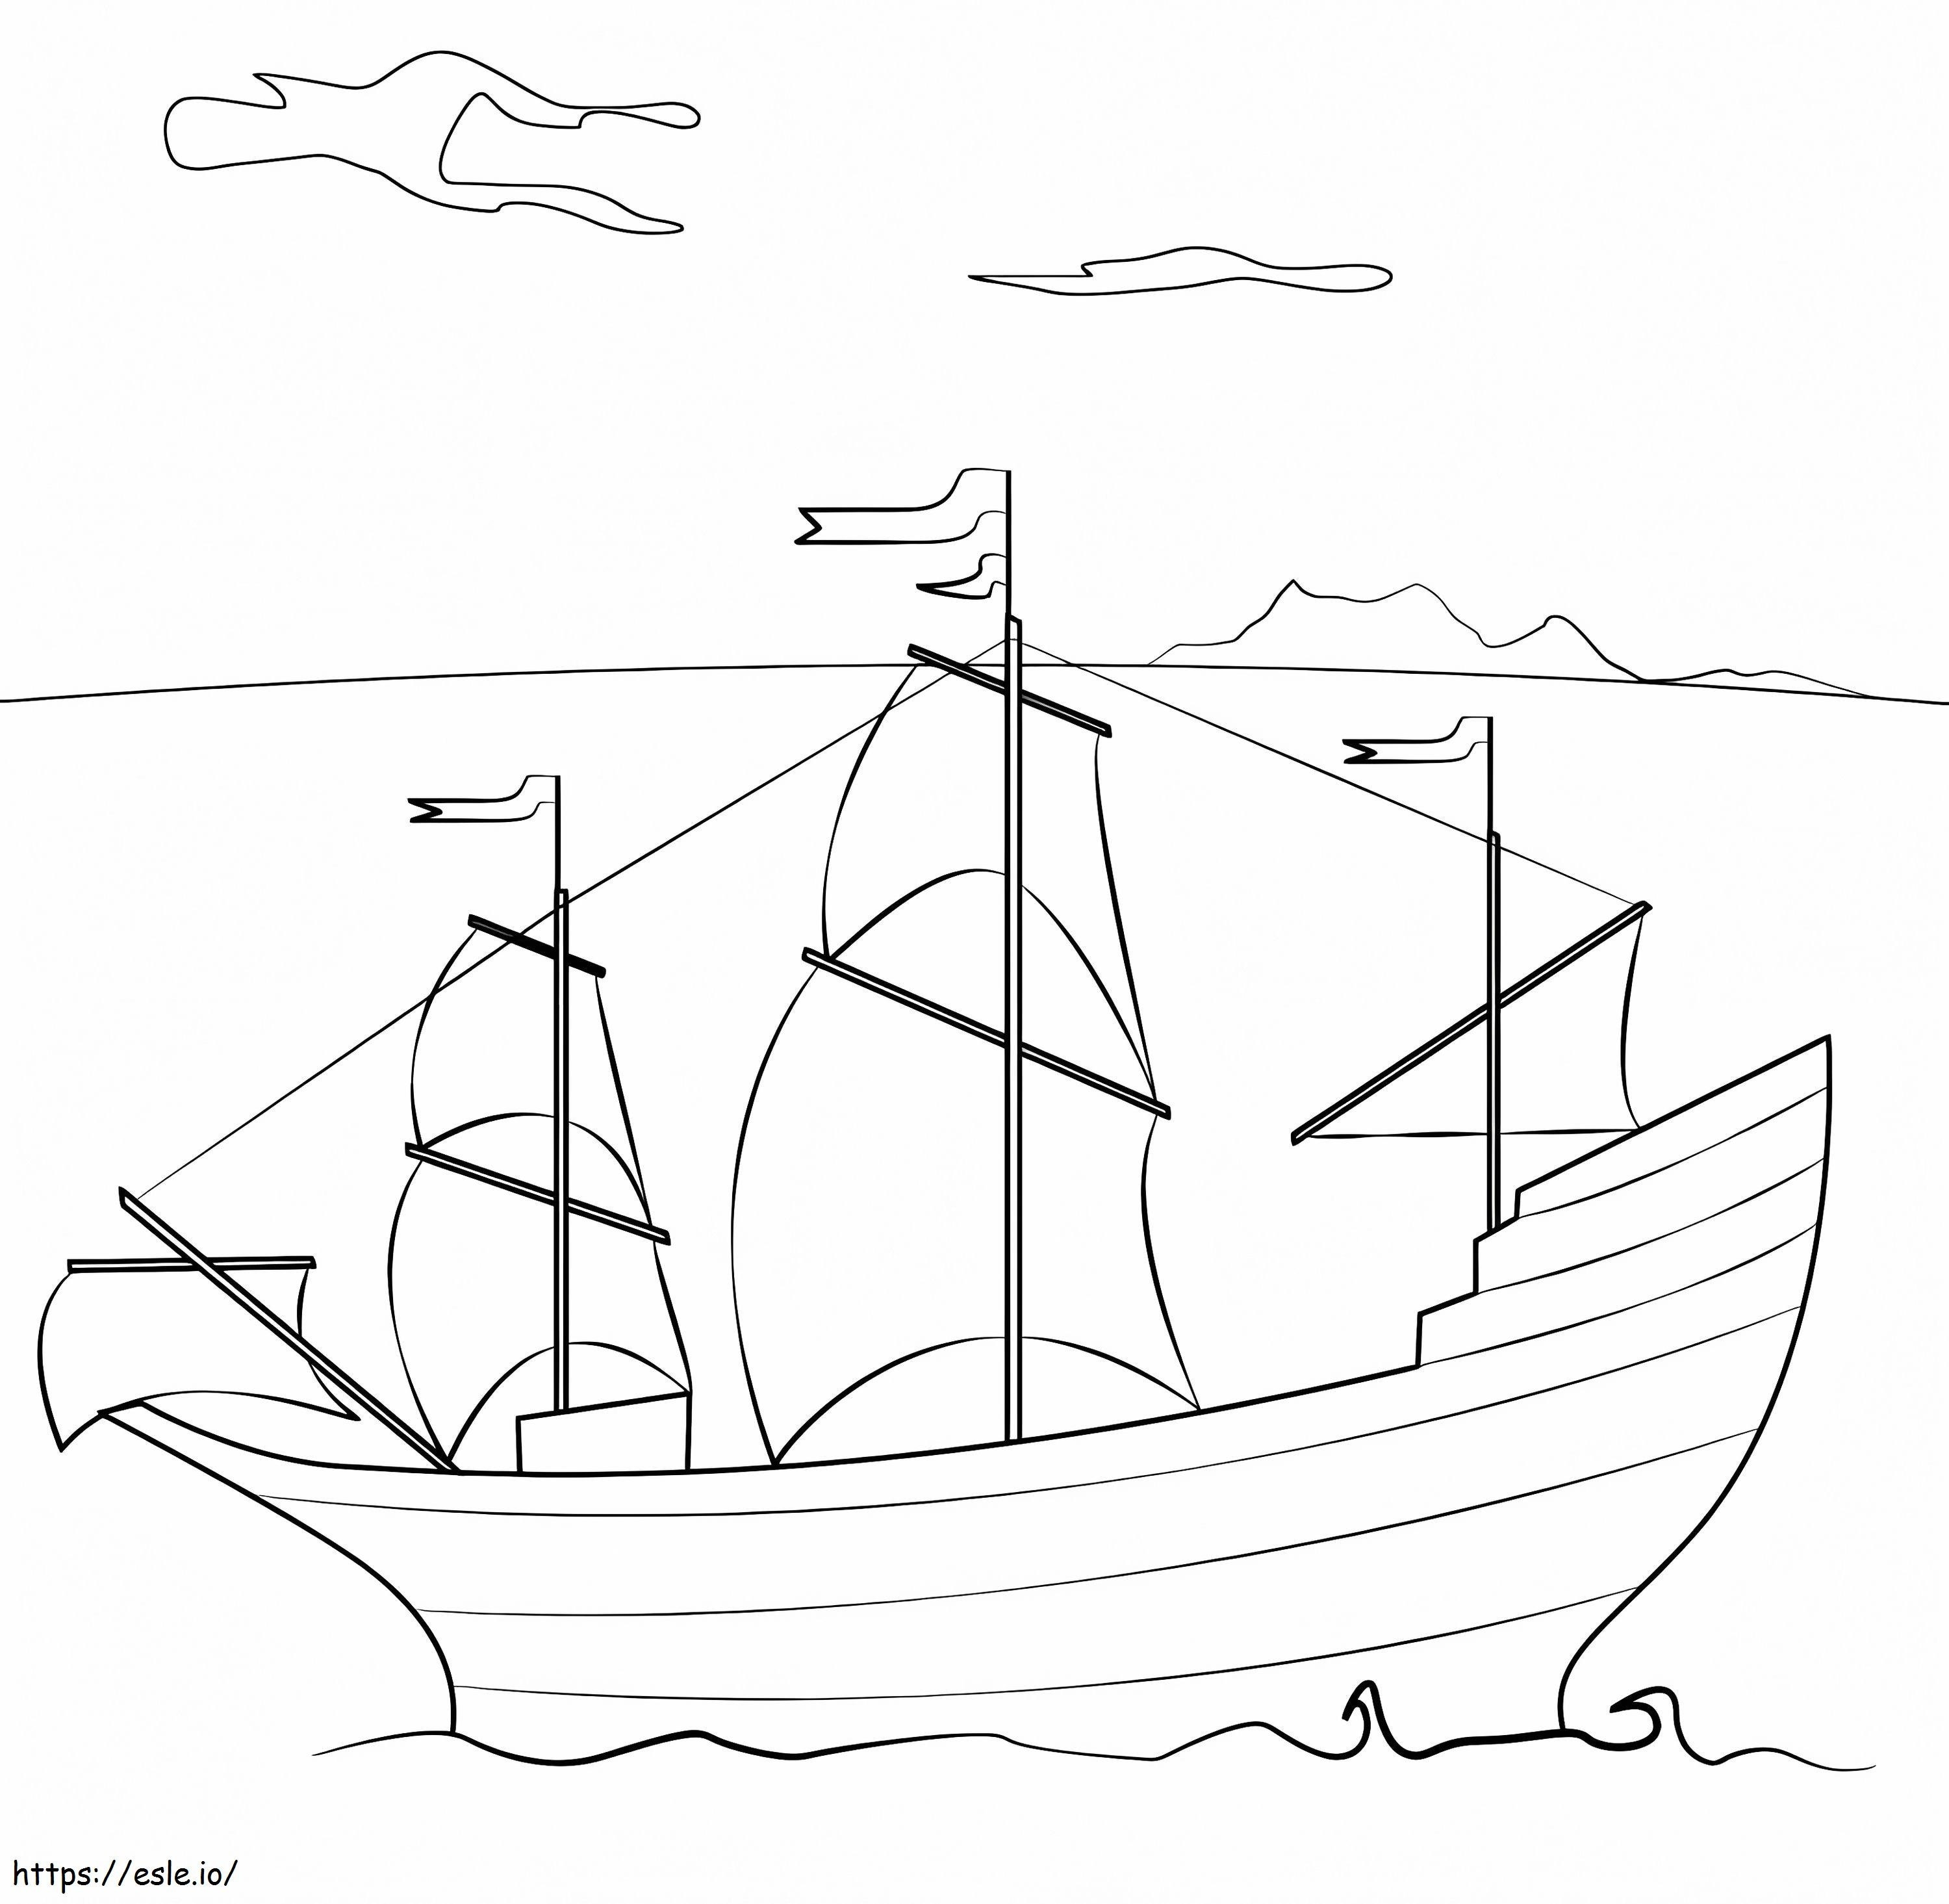 Mayflower 2 coloring page